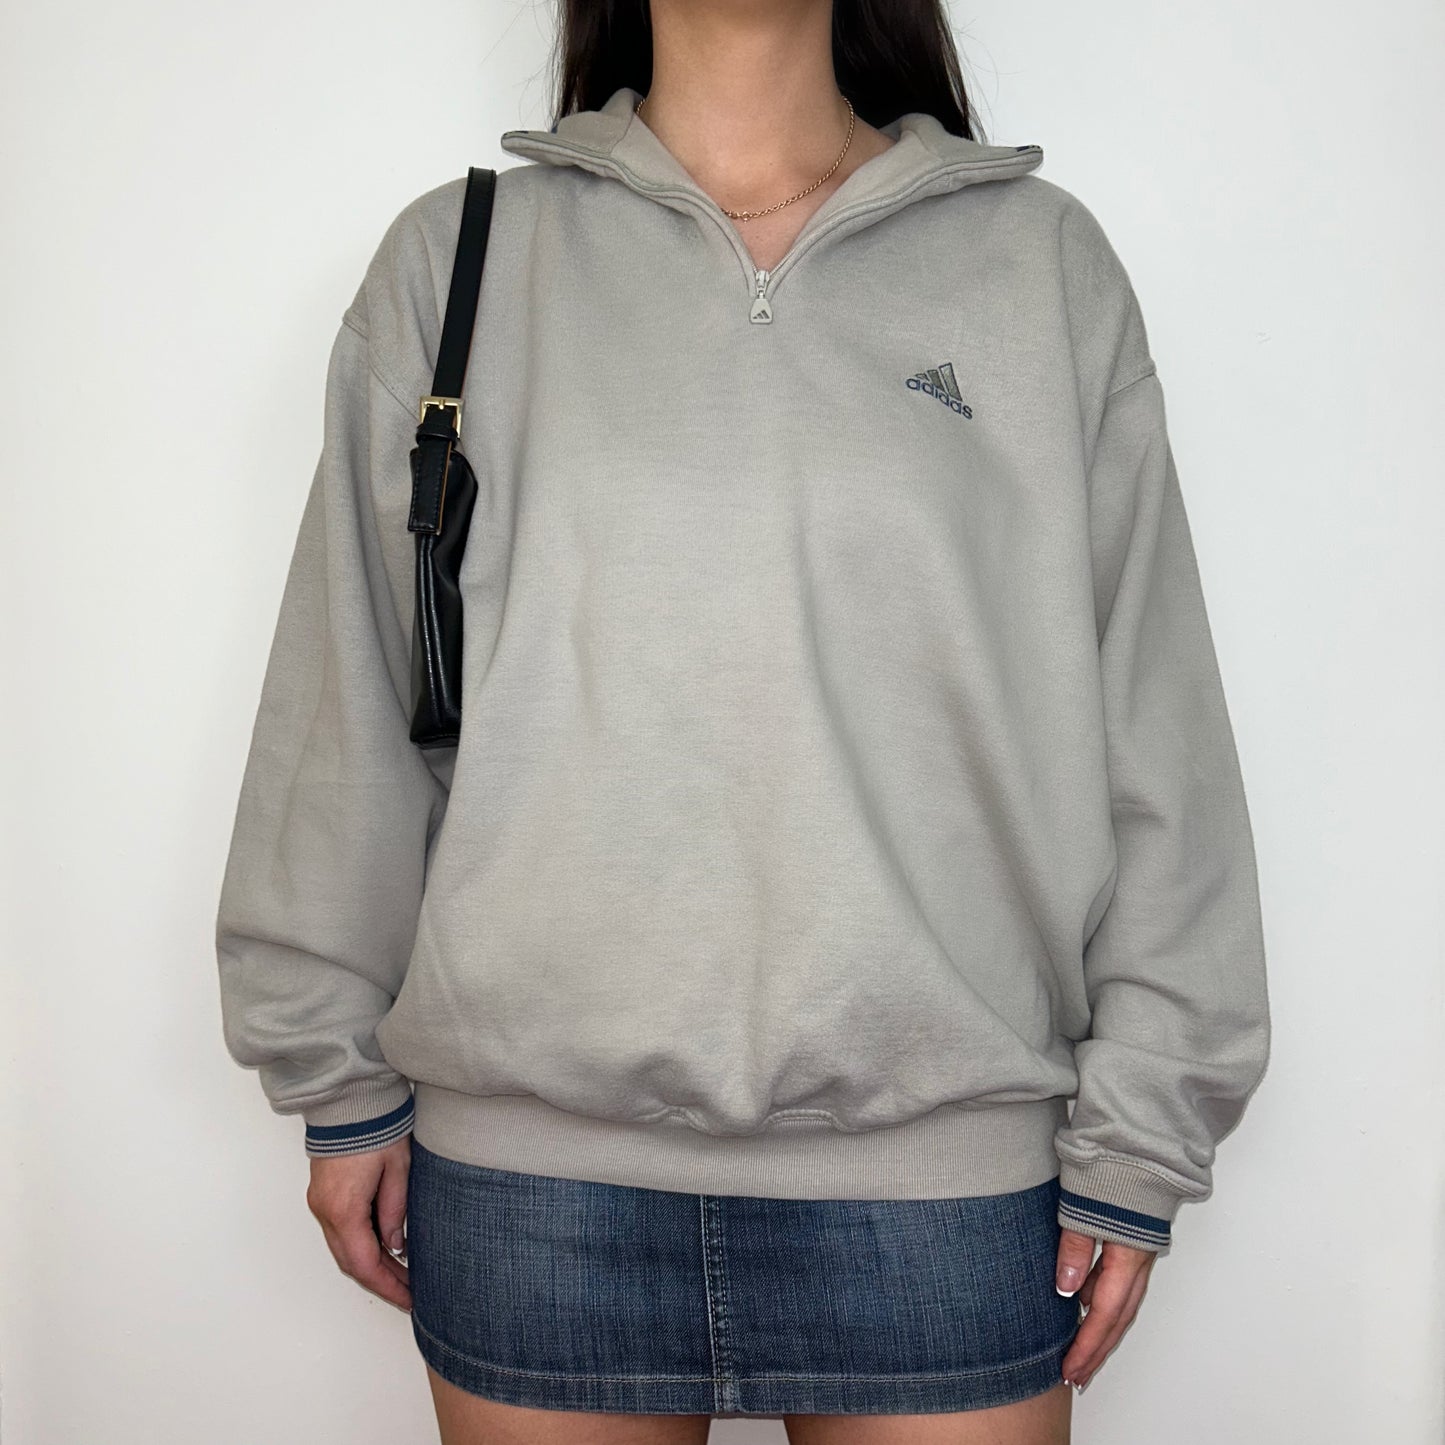 beige 1/4 zip sweatshirt with small adidas logo shown on a model wearing a blue denim skirt with a black shoulder bag